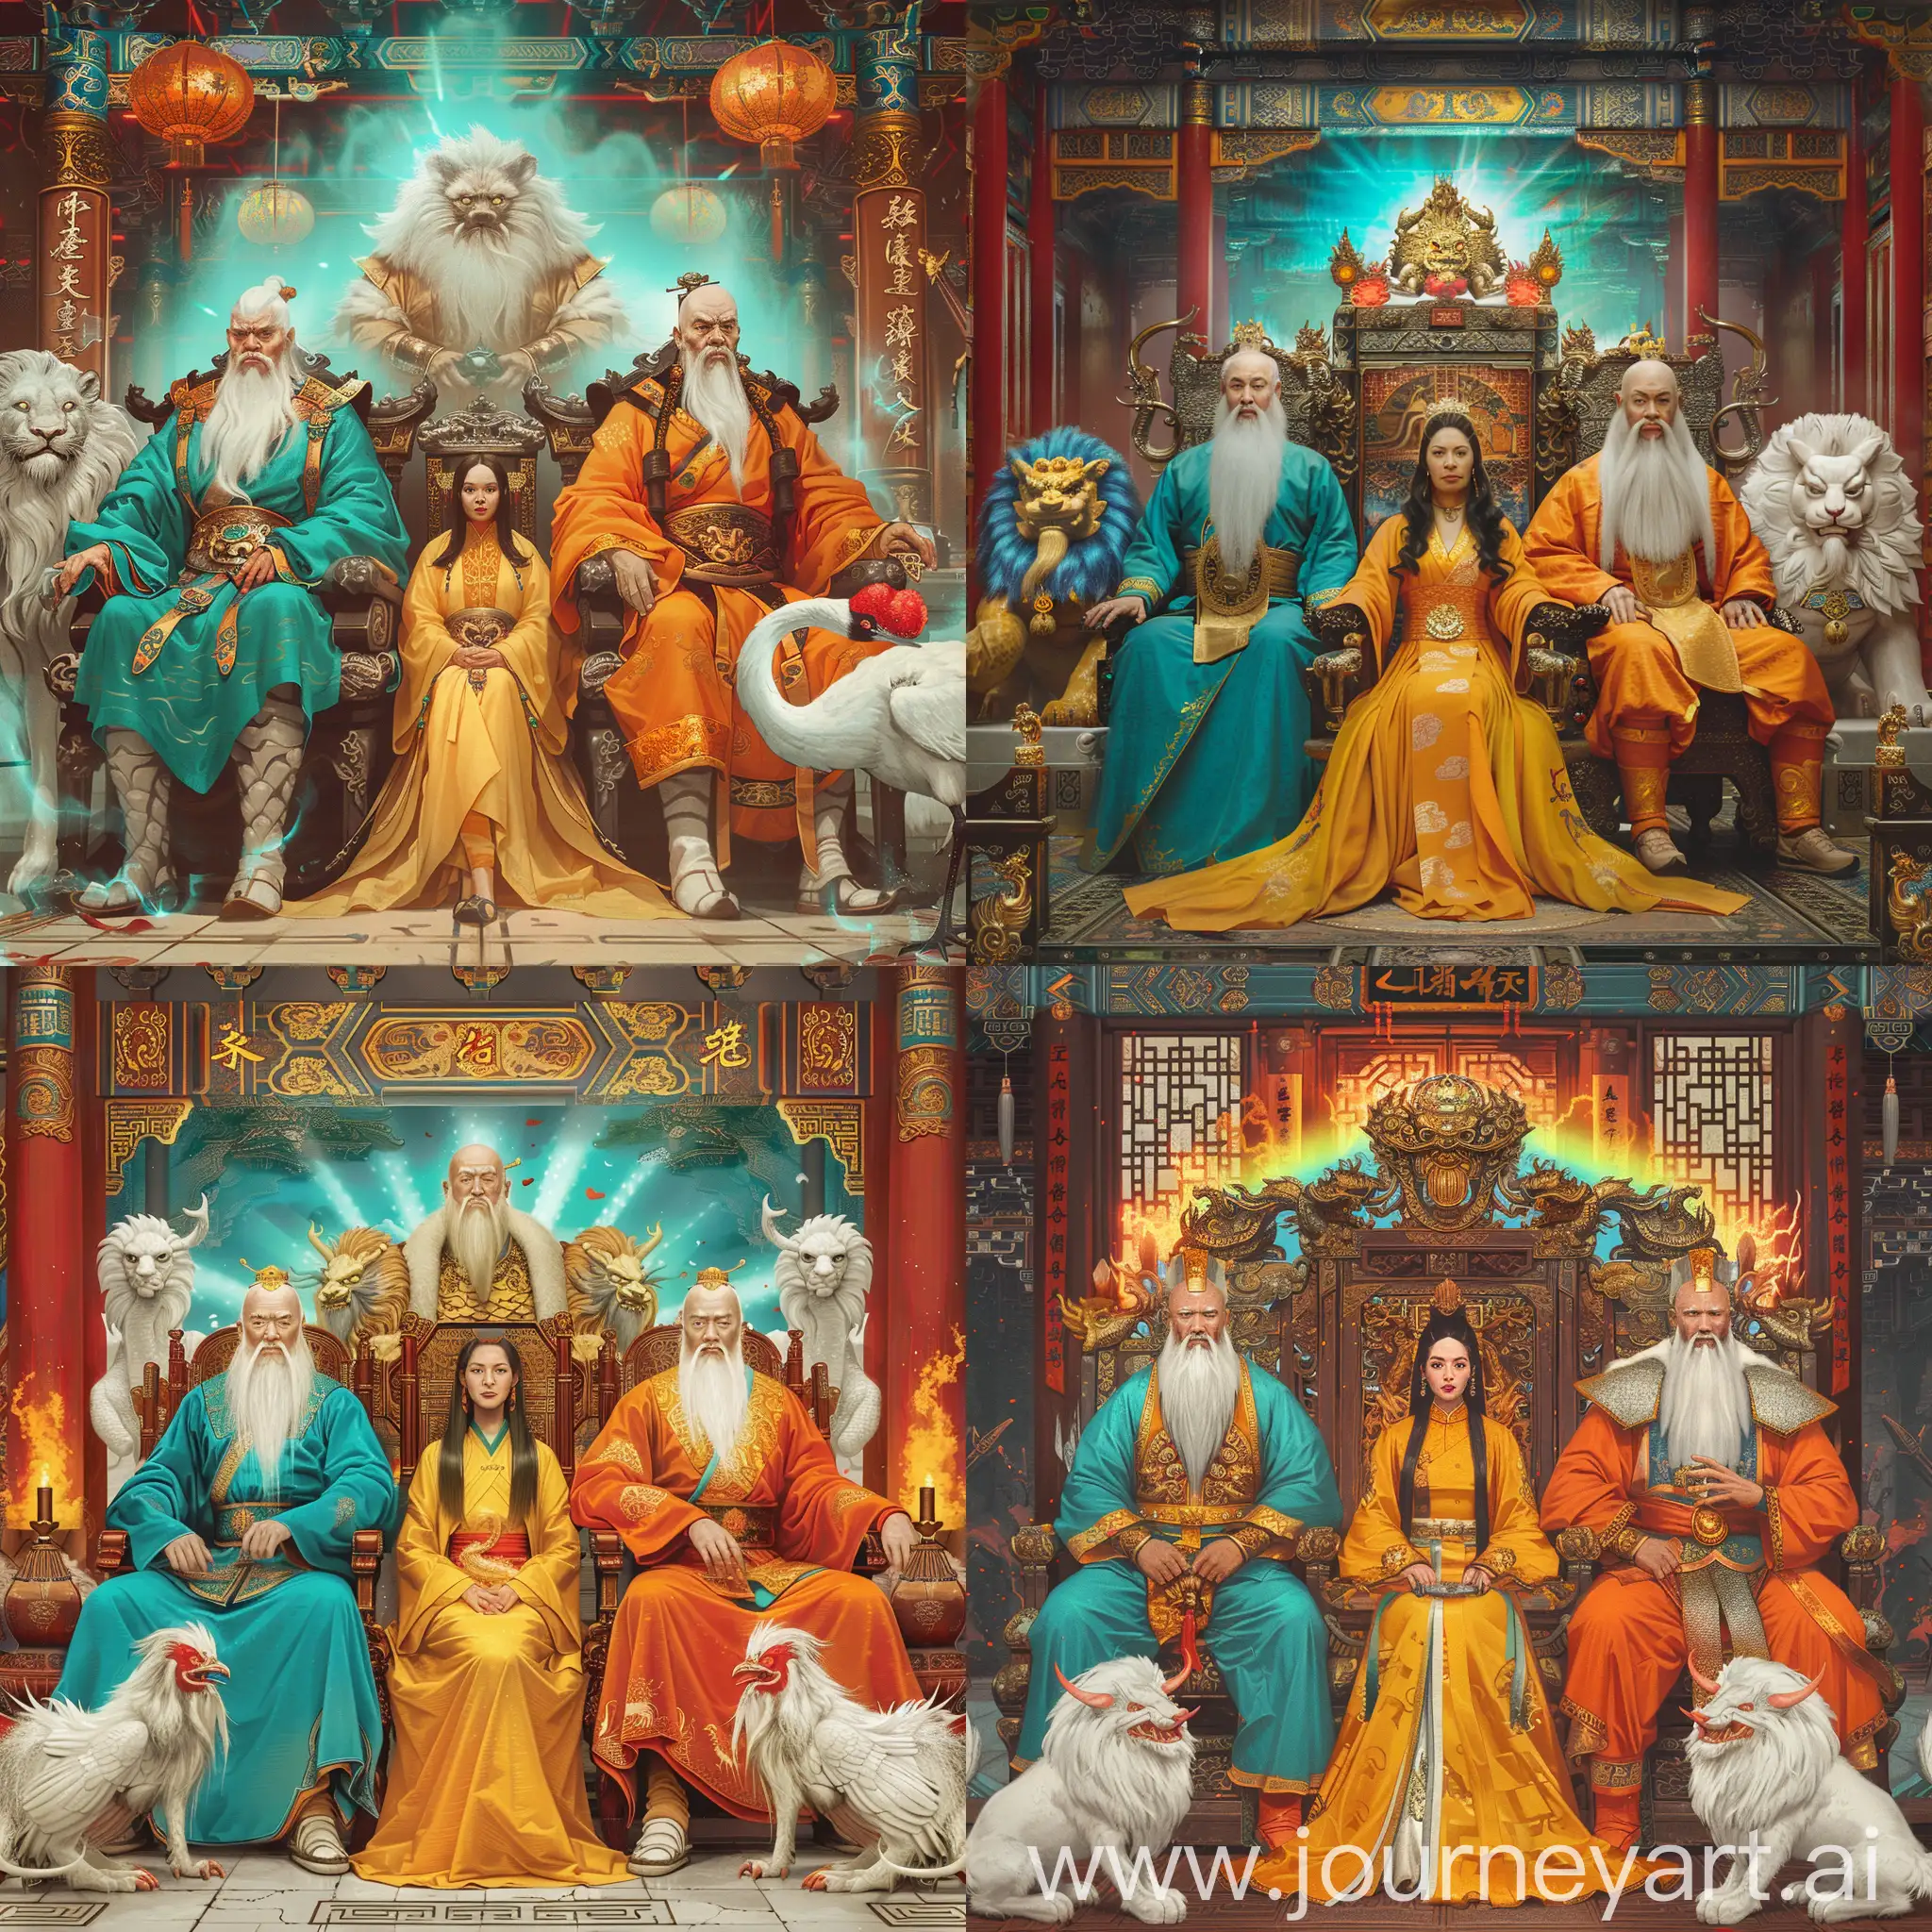 two Chinese Han dynasty Emperors with mid-long white hair and beards, with aurora behind their head, are sitting on their thrones,

the left one in turquoise clothes,
the right one is bald and in orange clothes, 

a middle-aged black hair Chinese empress sits on her throne in the middle, between the two emperors, she is in deep yellow clothes,

an azure nine-headed lion on left side and a white red-crowned crane on right side, they are before the emperors,

they are all inside a splendid Chinese Palace,